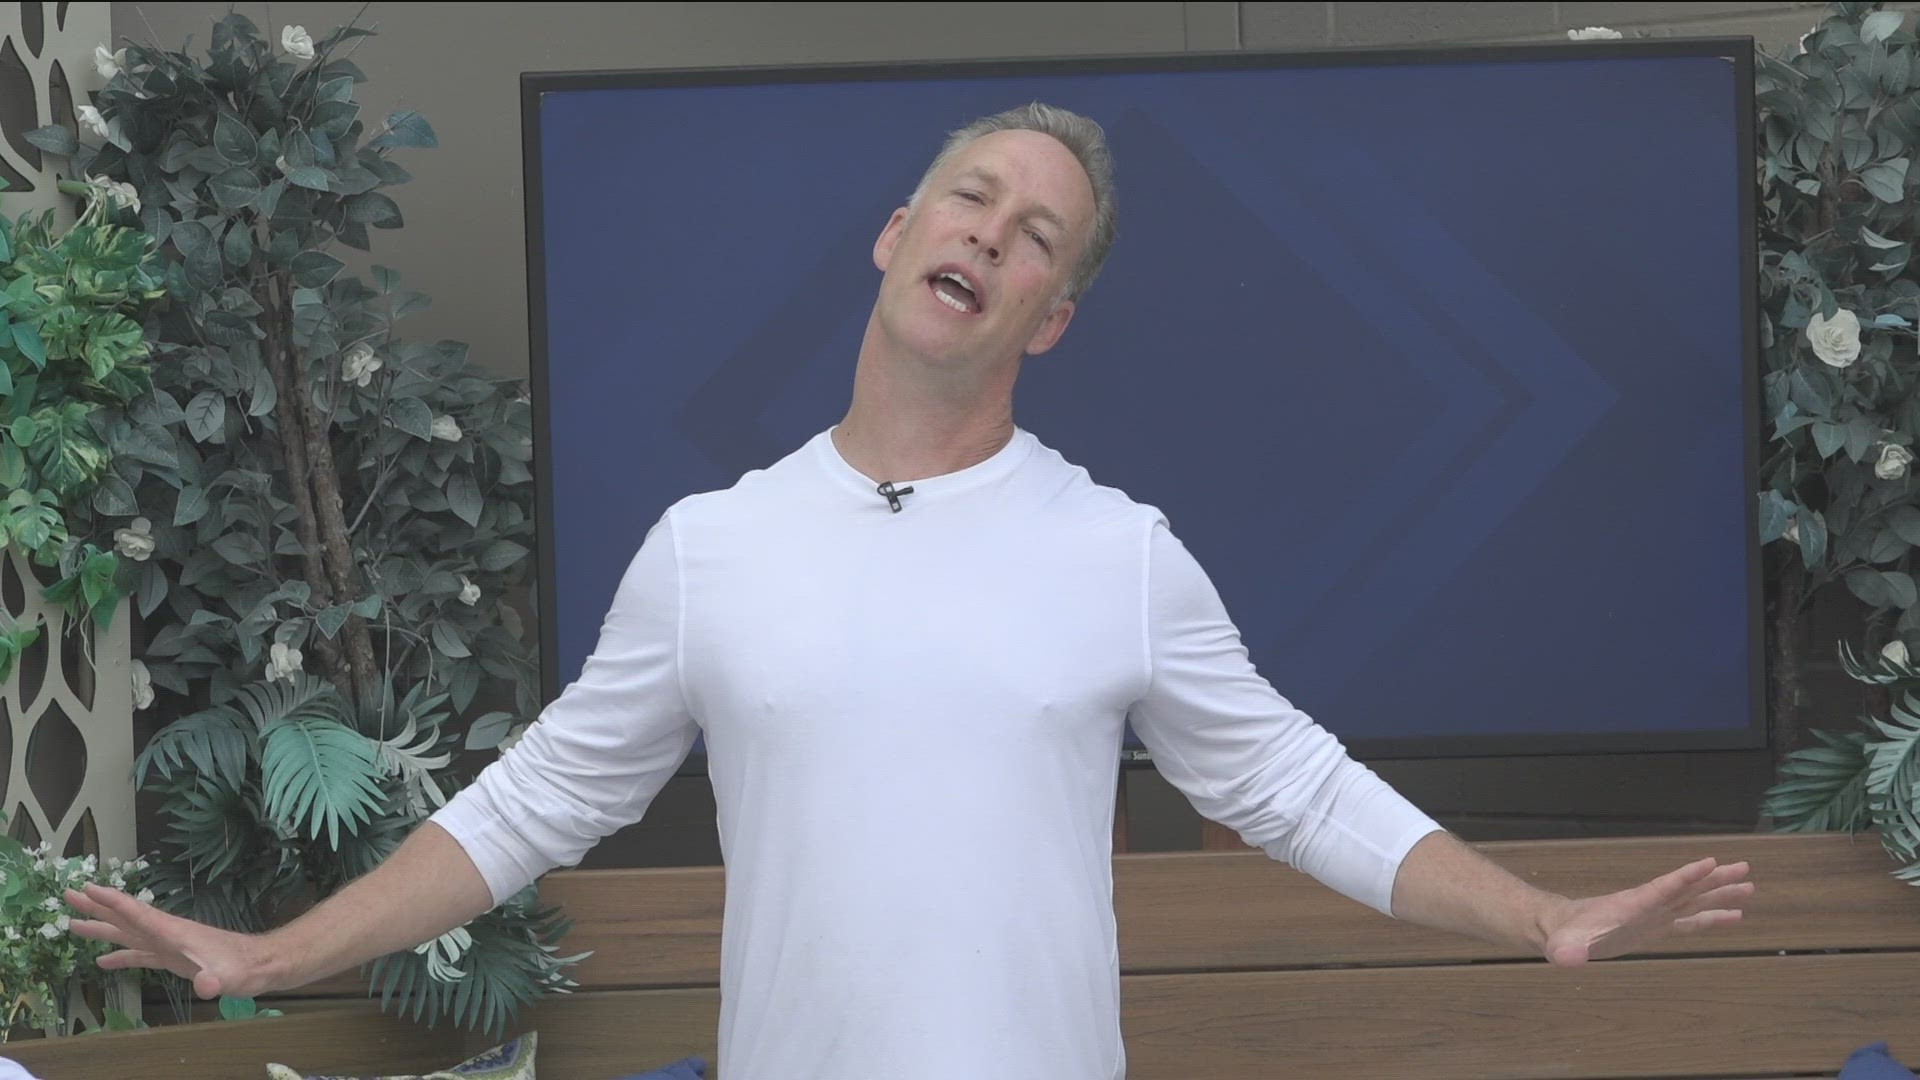 Lee Holden, master of the ancient art of Qigong and CEO/founder at Holden QiGong, talks about bringing the Chinese practice to the modern world.